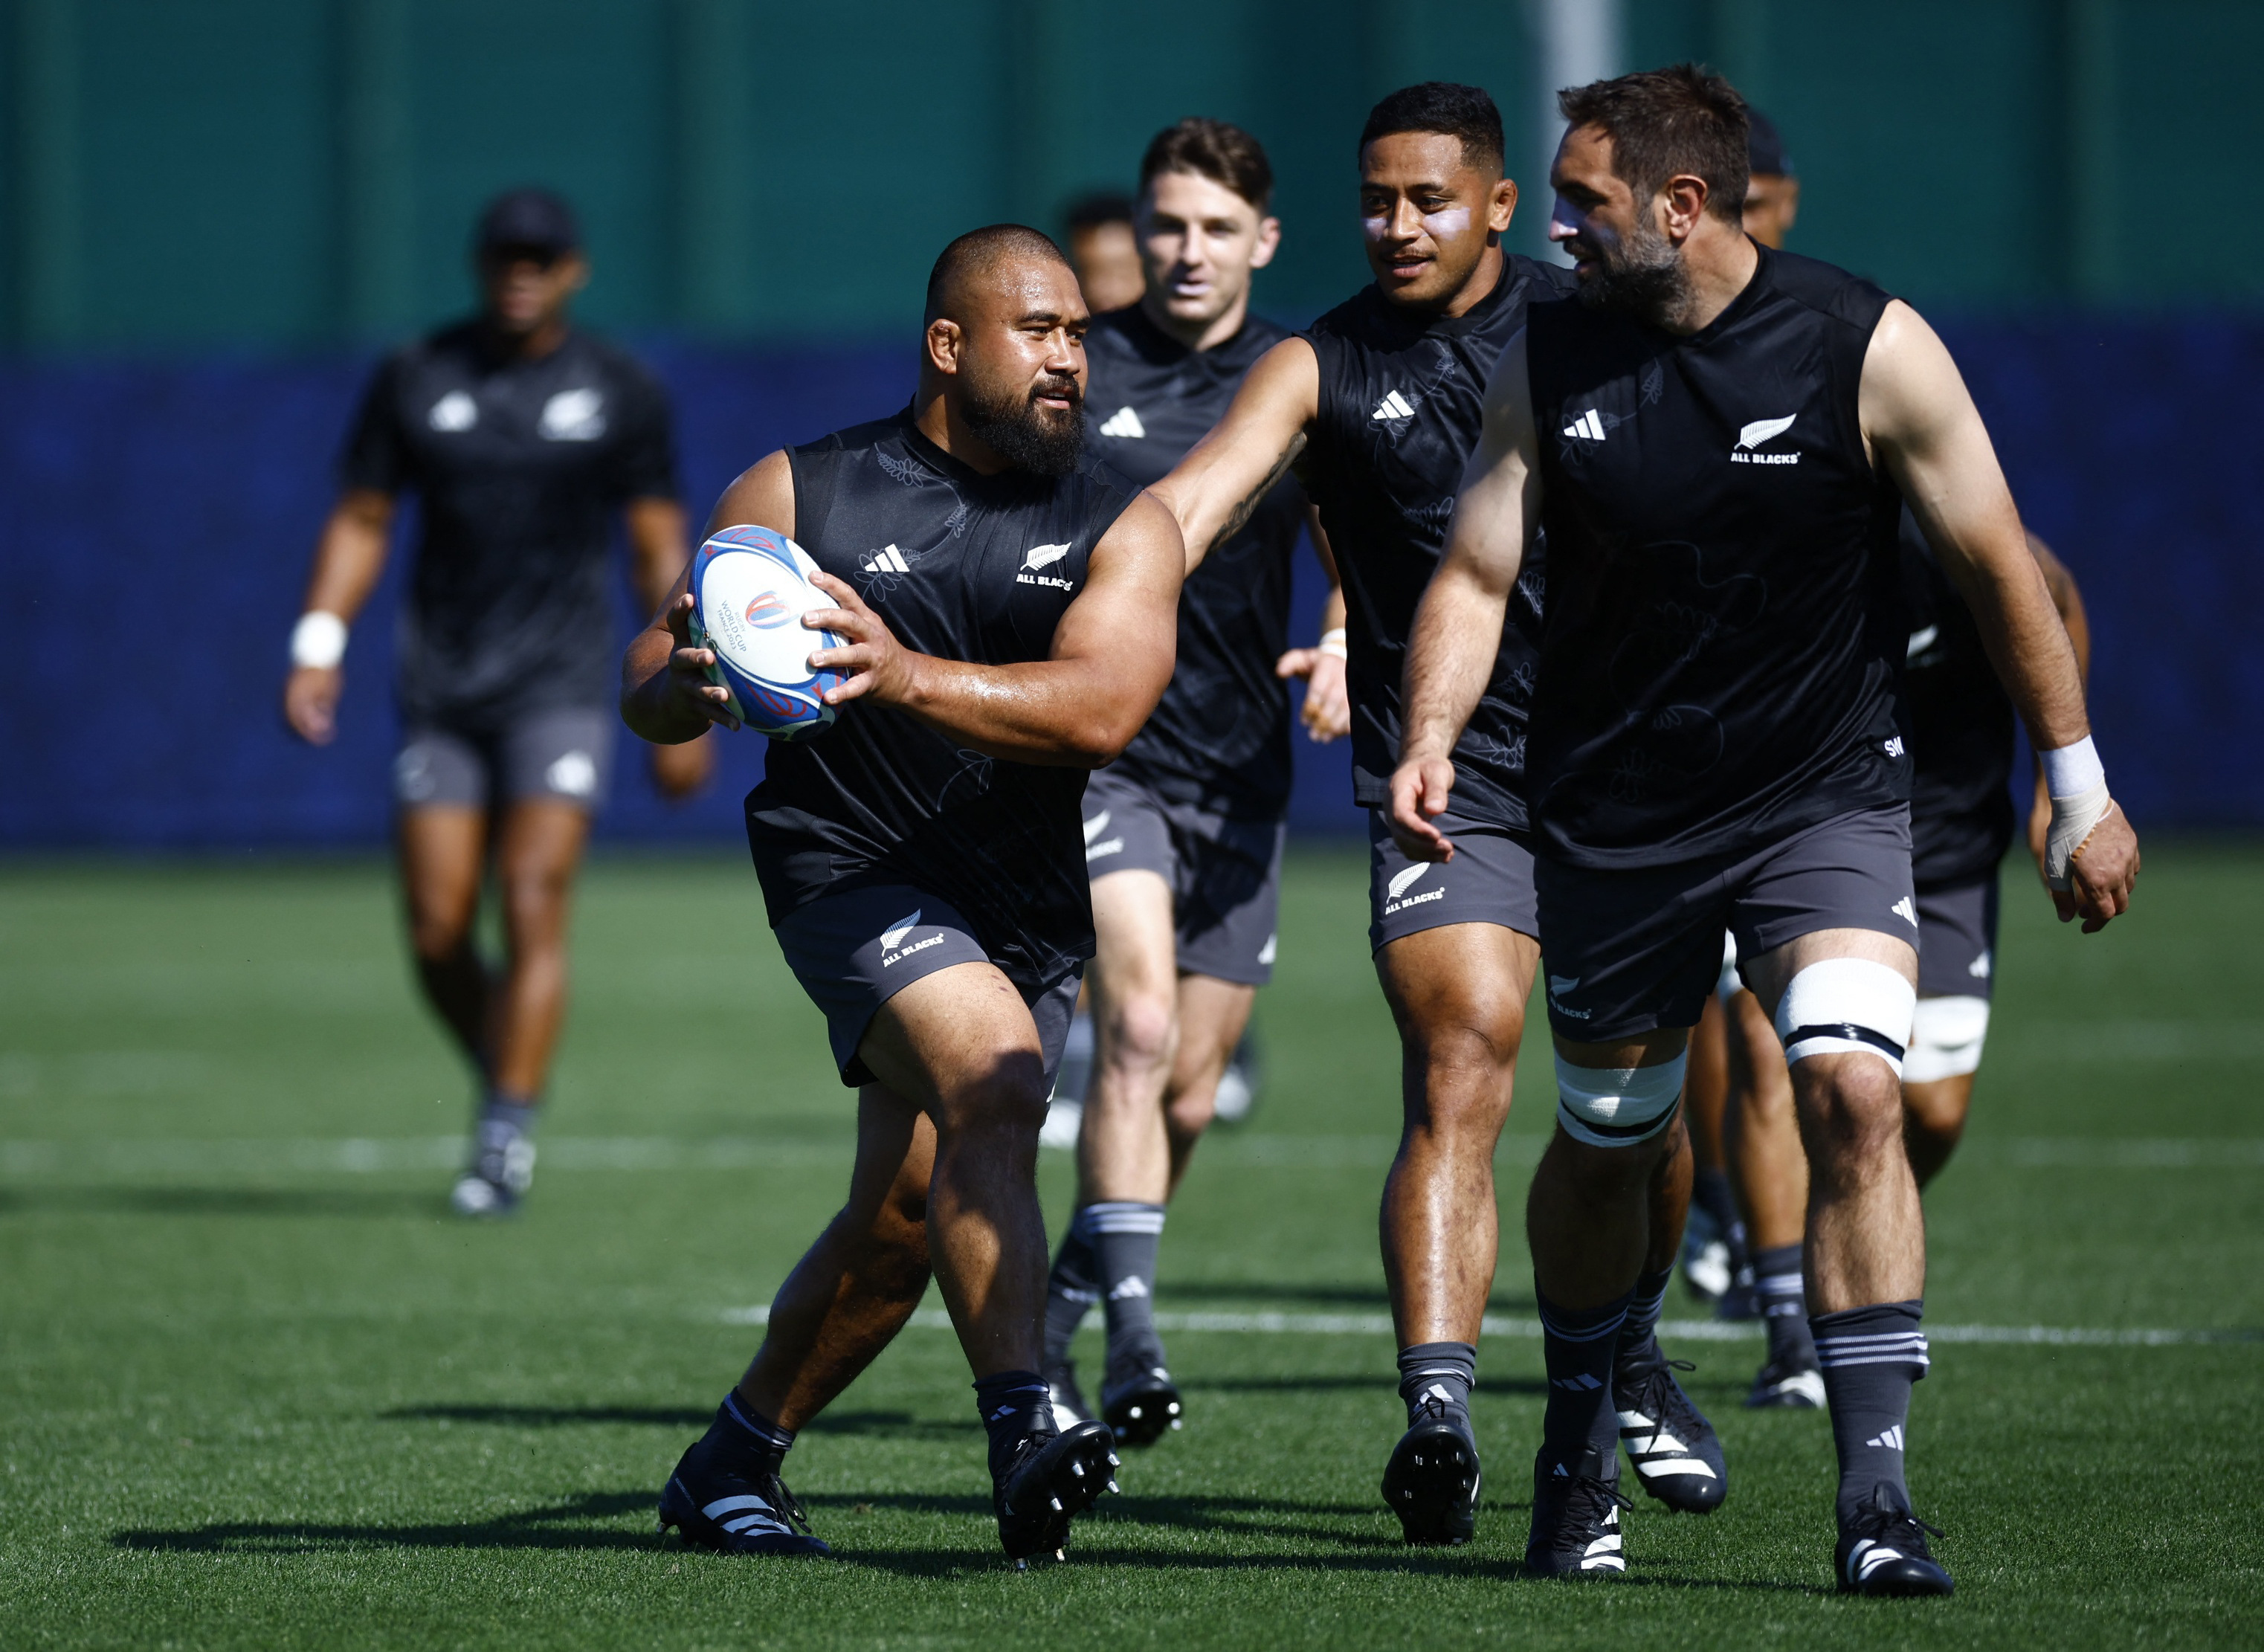 All Blacks have a point to prove in blockbuster opener Reuters